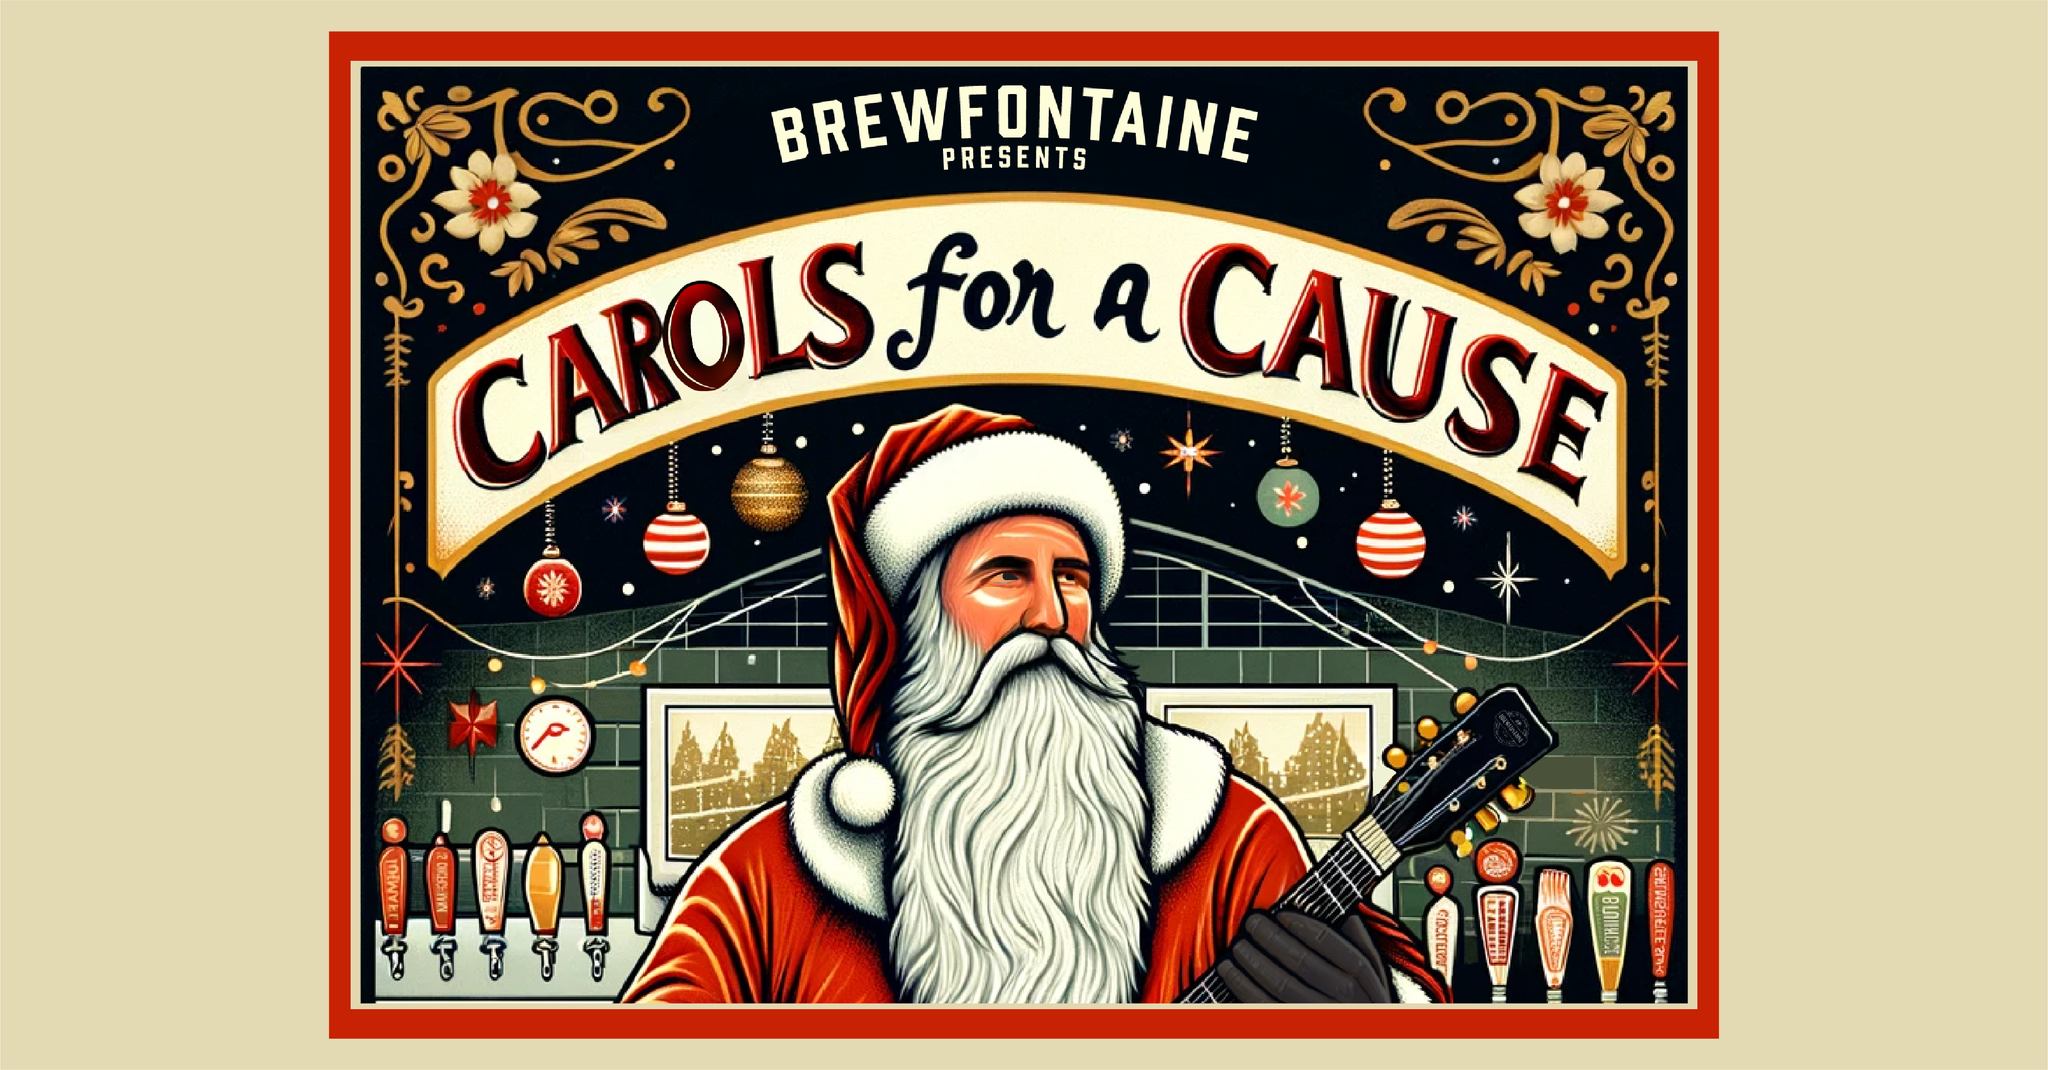 Brewfontaine Presents: Carols for a Cause 2023